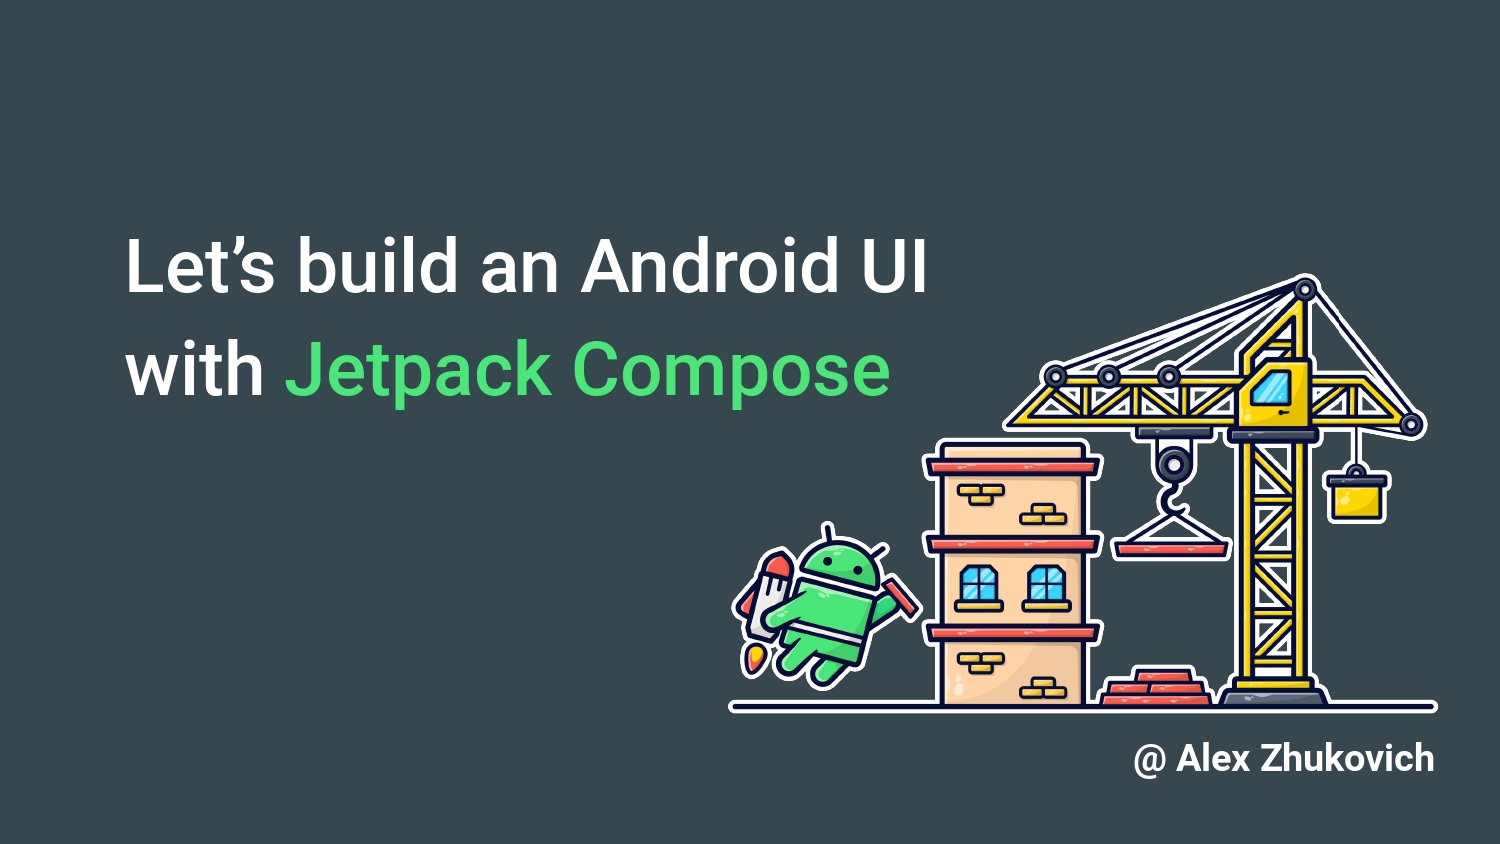 Let_s_build_Android_UI_with_Jetpack_Compose_page-0001.jpg